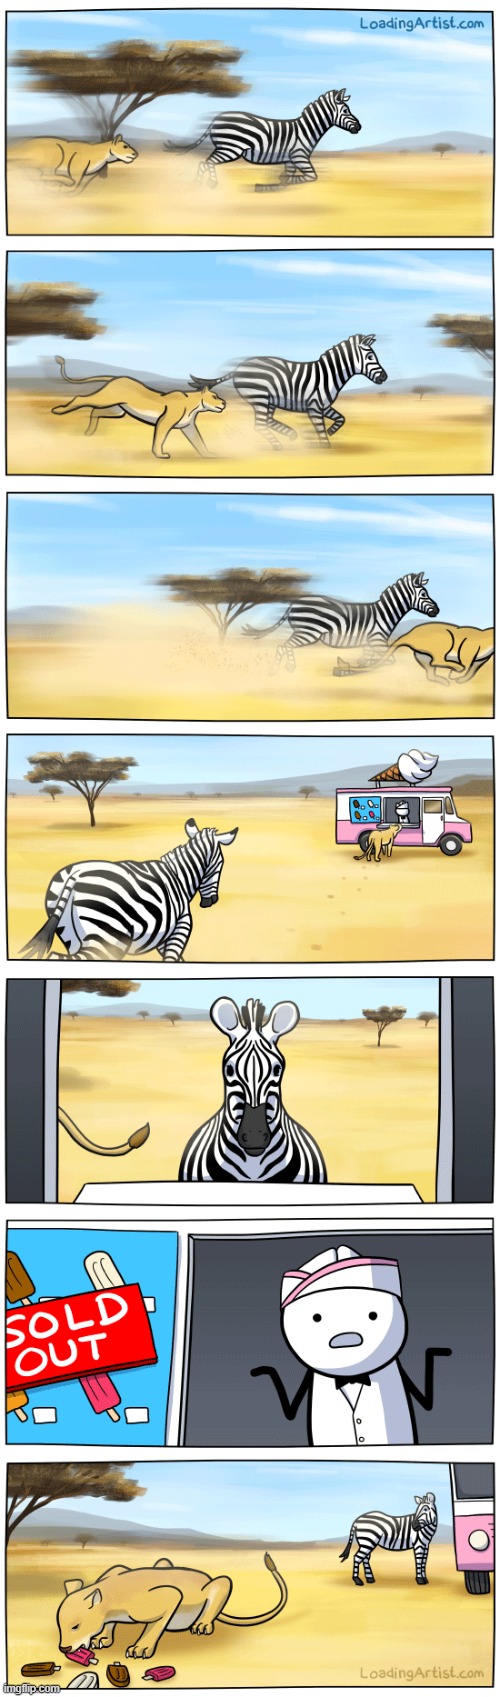 poor zebra | image tagged in f | made w/ Imgflip meme maker